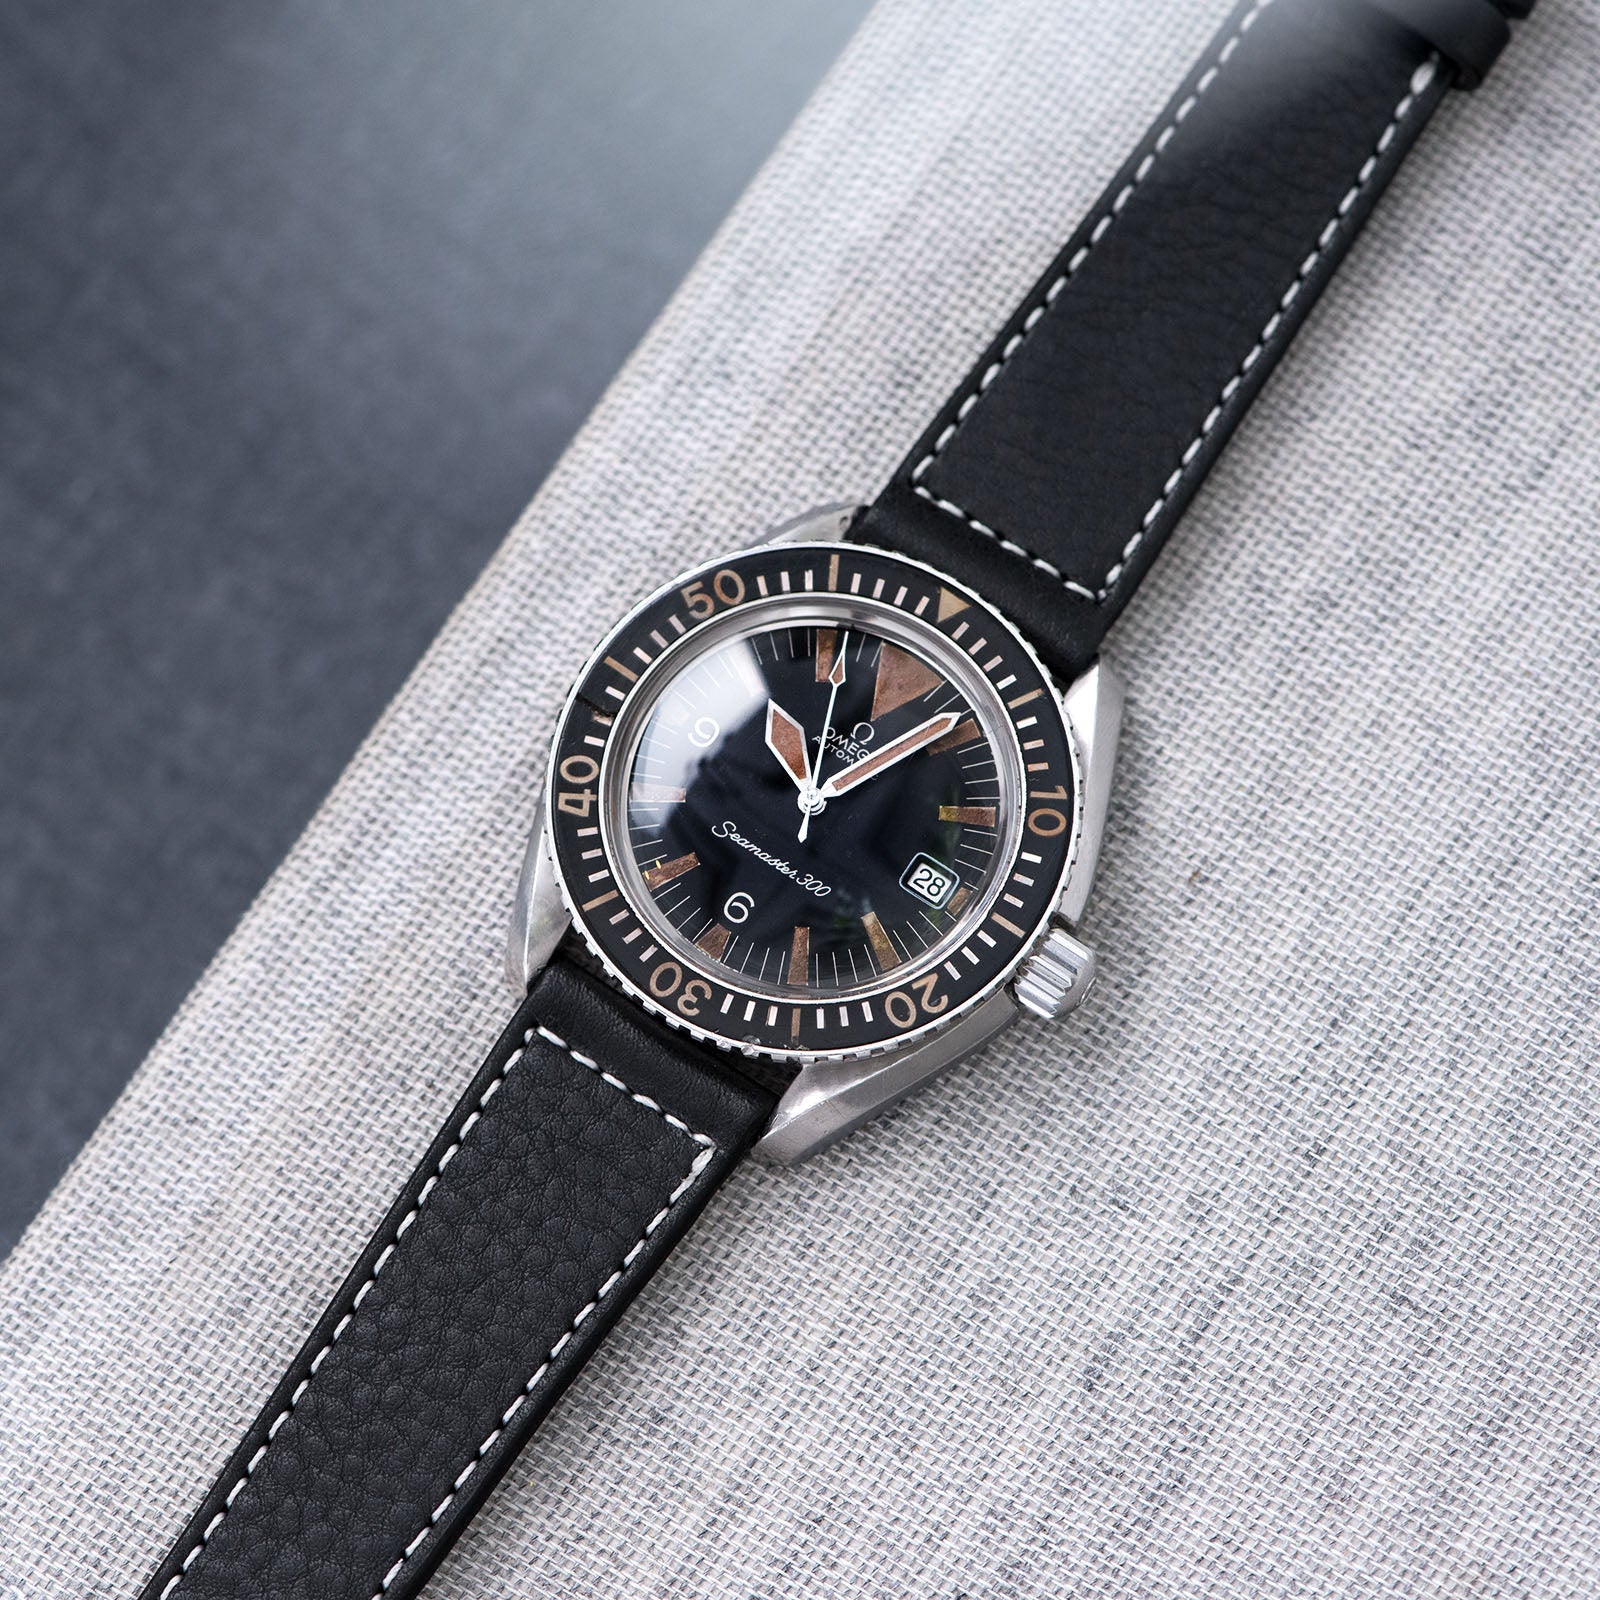 Bulang and Sons_Strap Guide_The omega SM 300 Seamaster_Black Boxed Stitch Leather Watch Strap